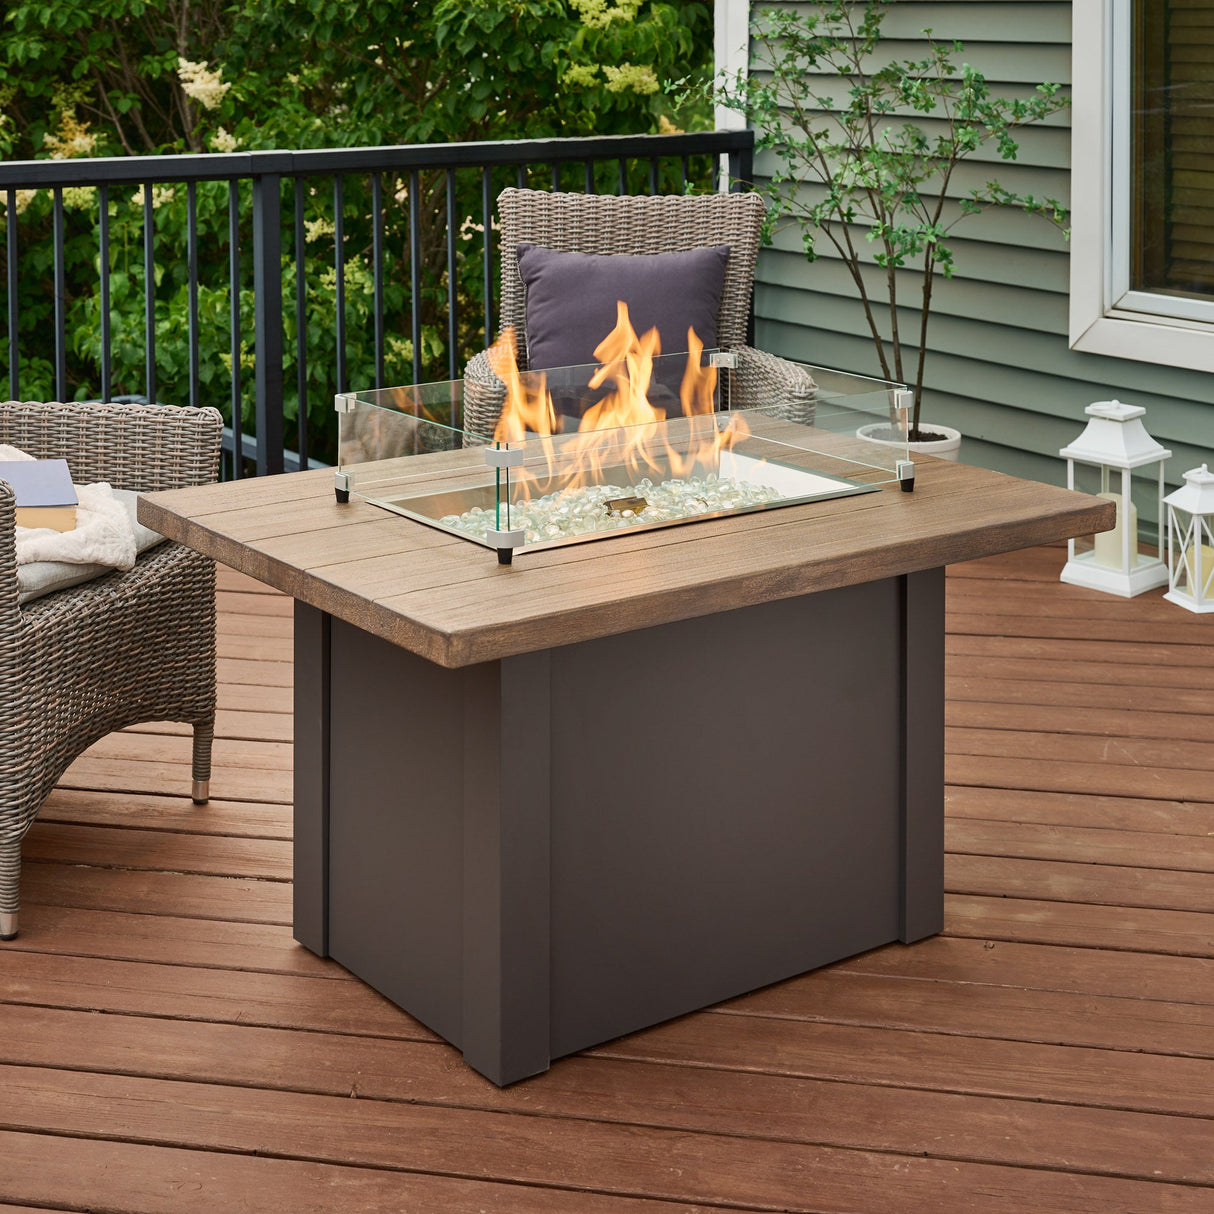 A Havenwood Rectangular Gas Fire Pit Table with a glass wind guard on a spacious outdoor space